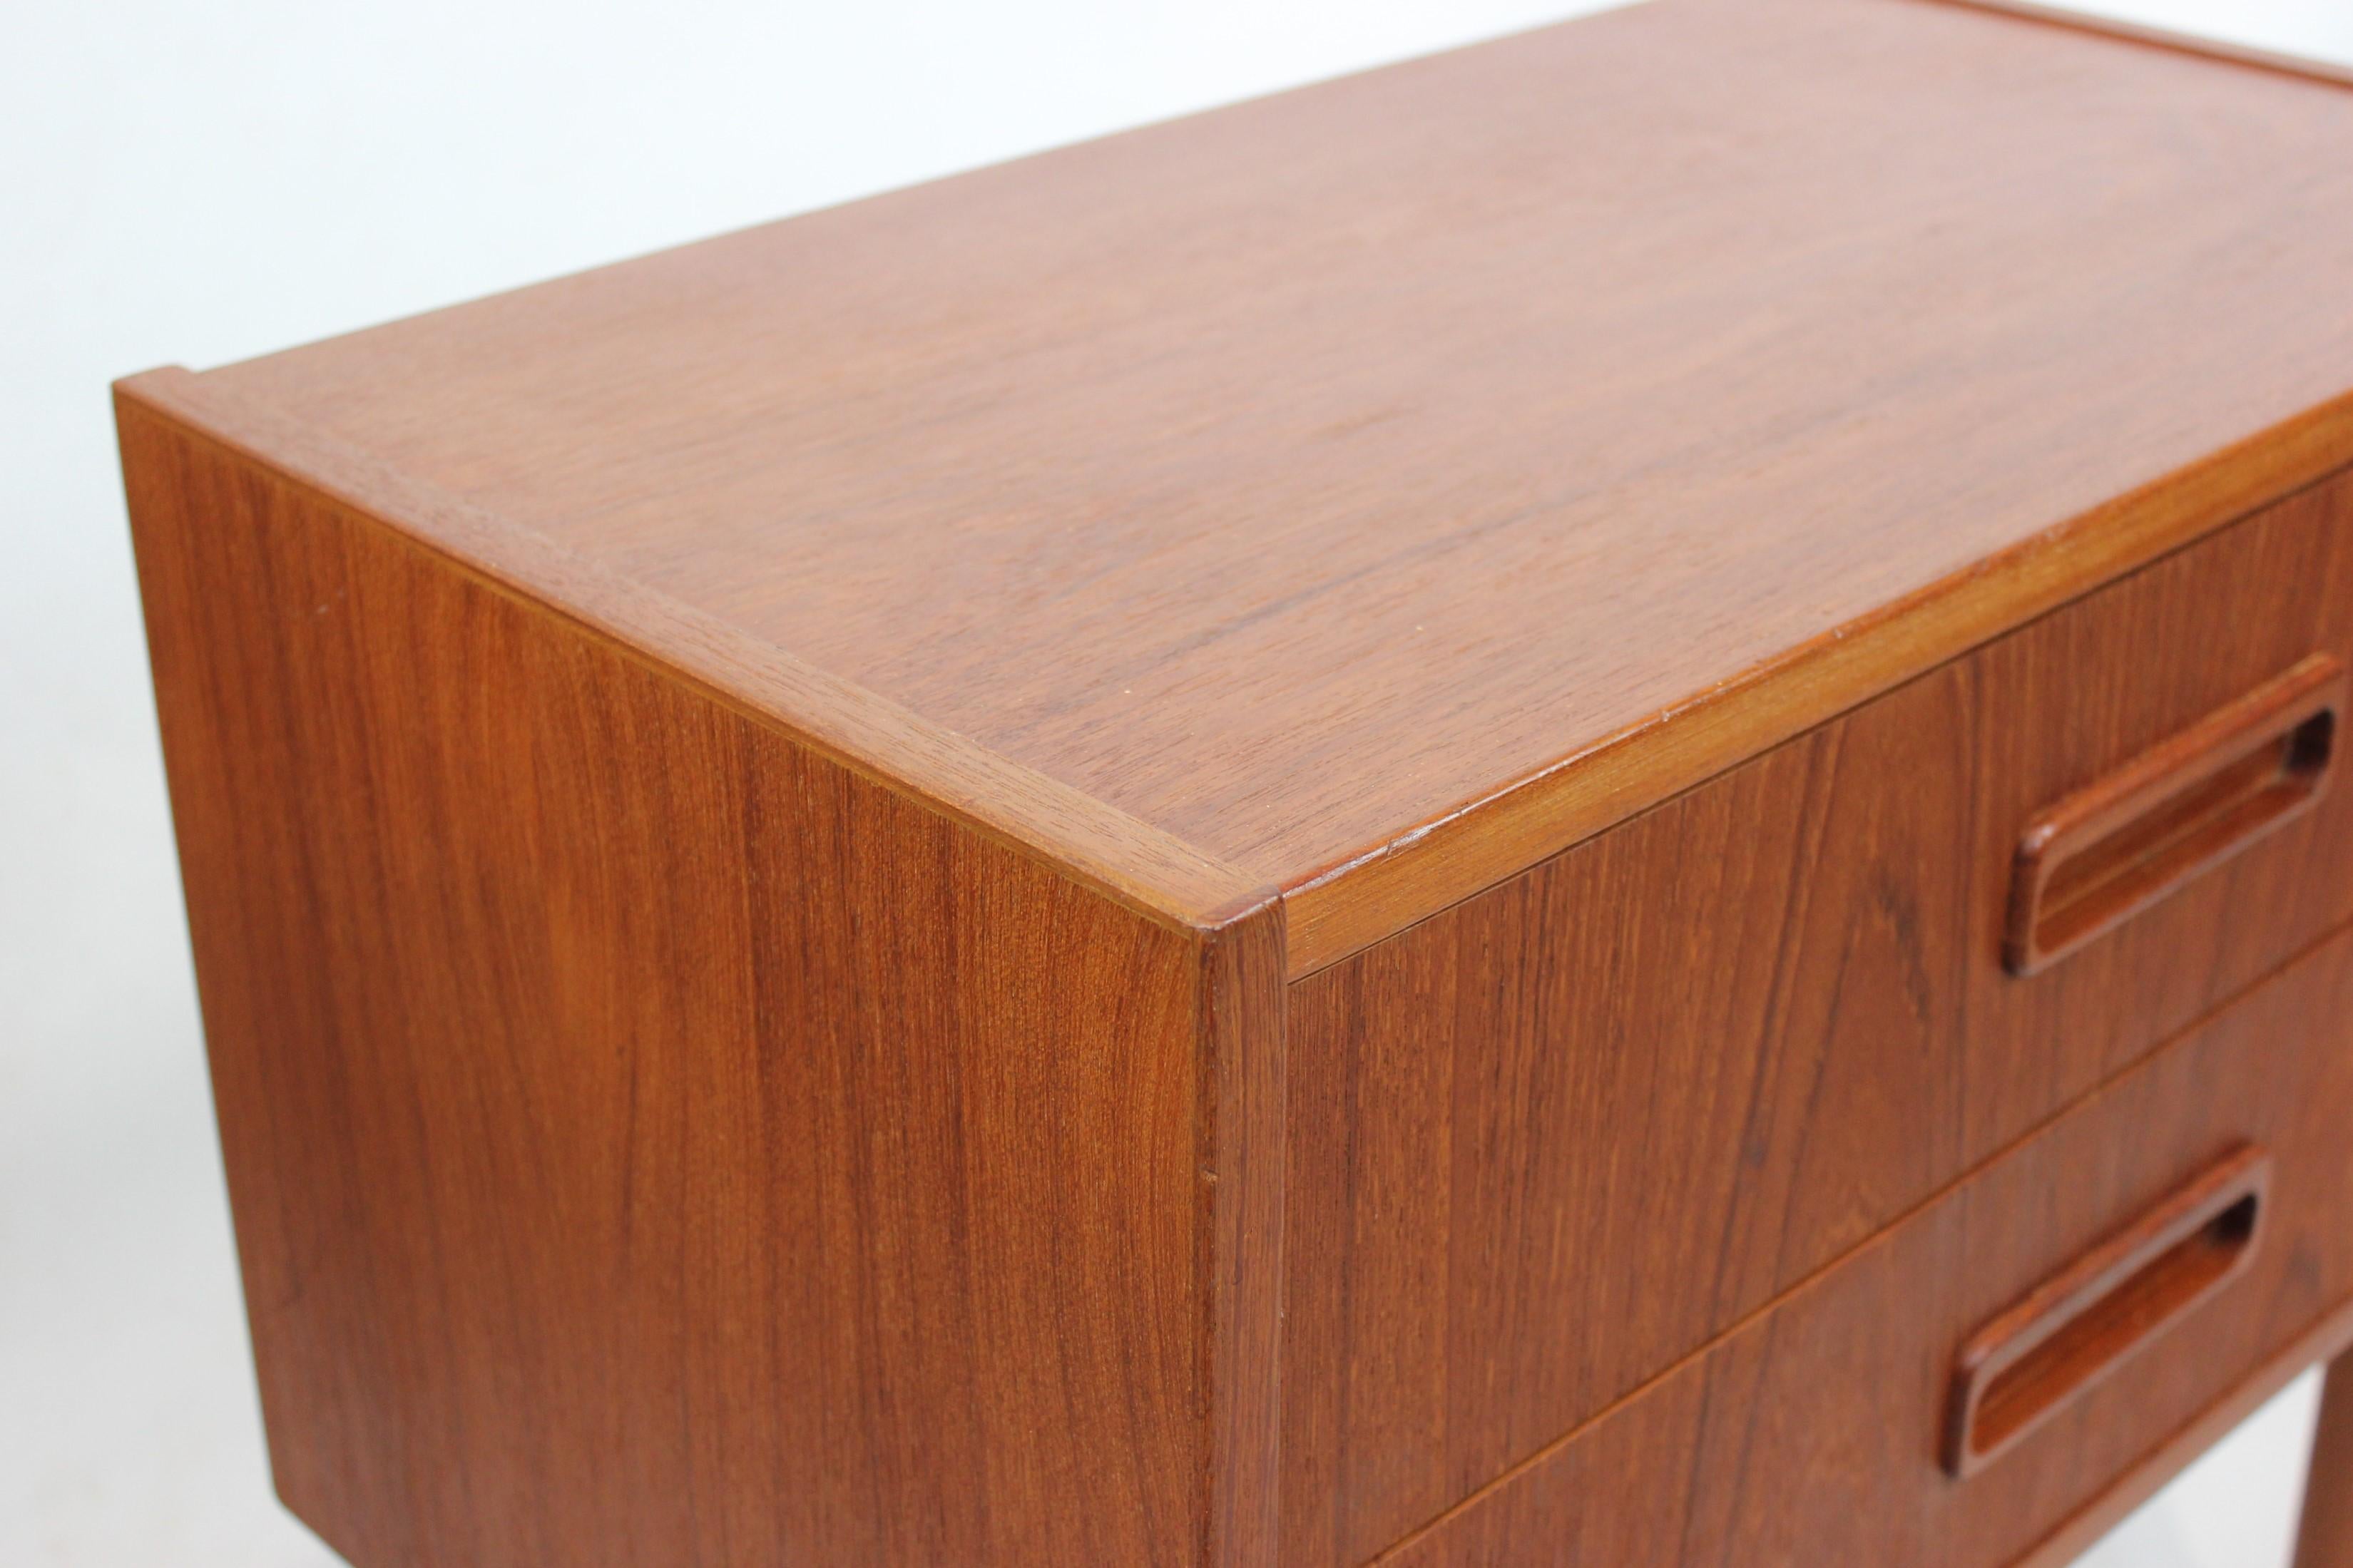 Small Chest of Drawers in Teak of Danish Design from the 1960s For Sale 2